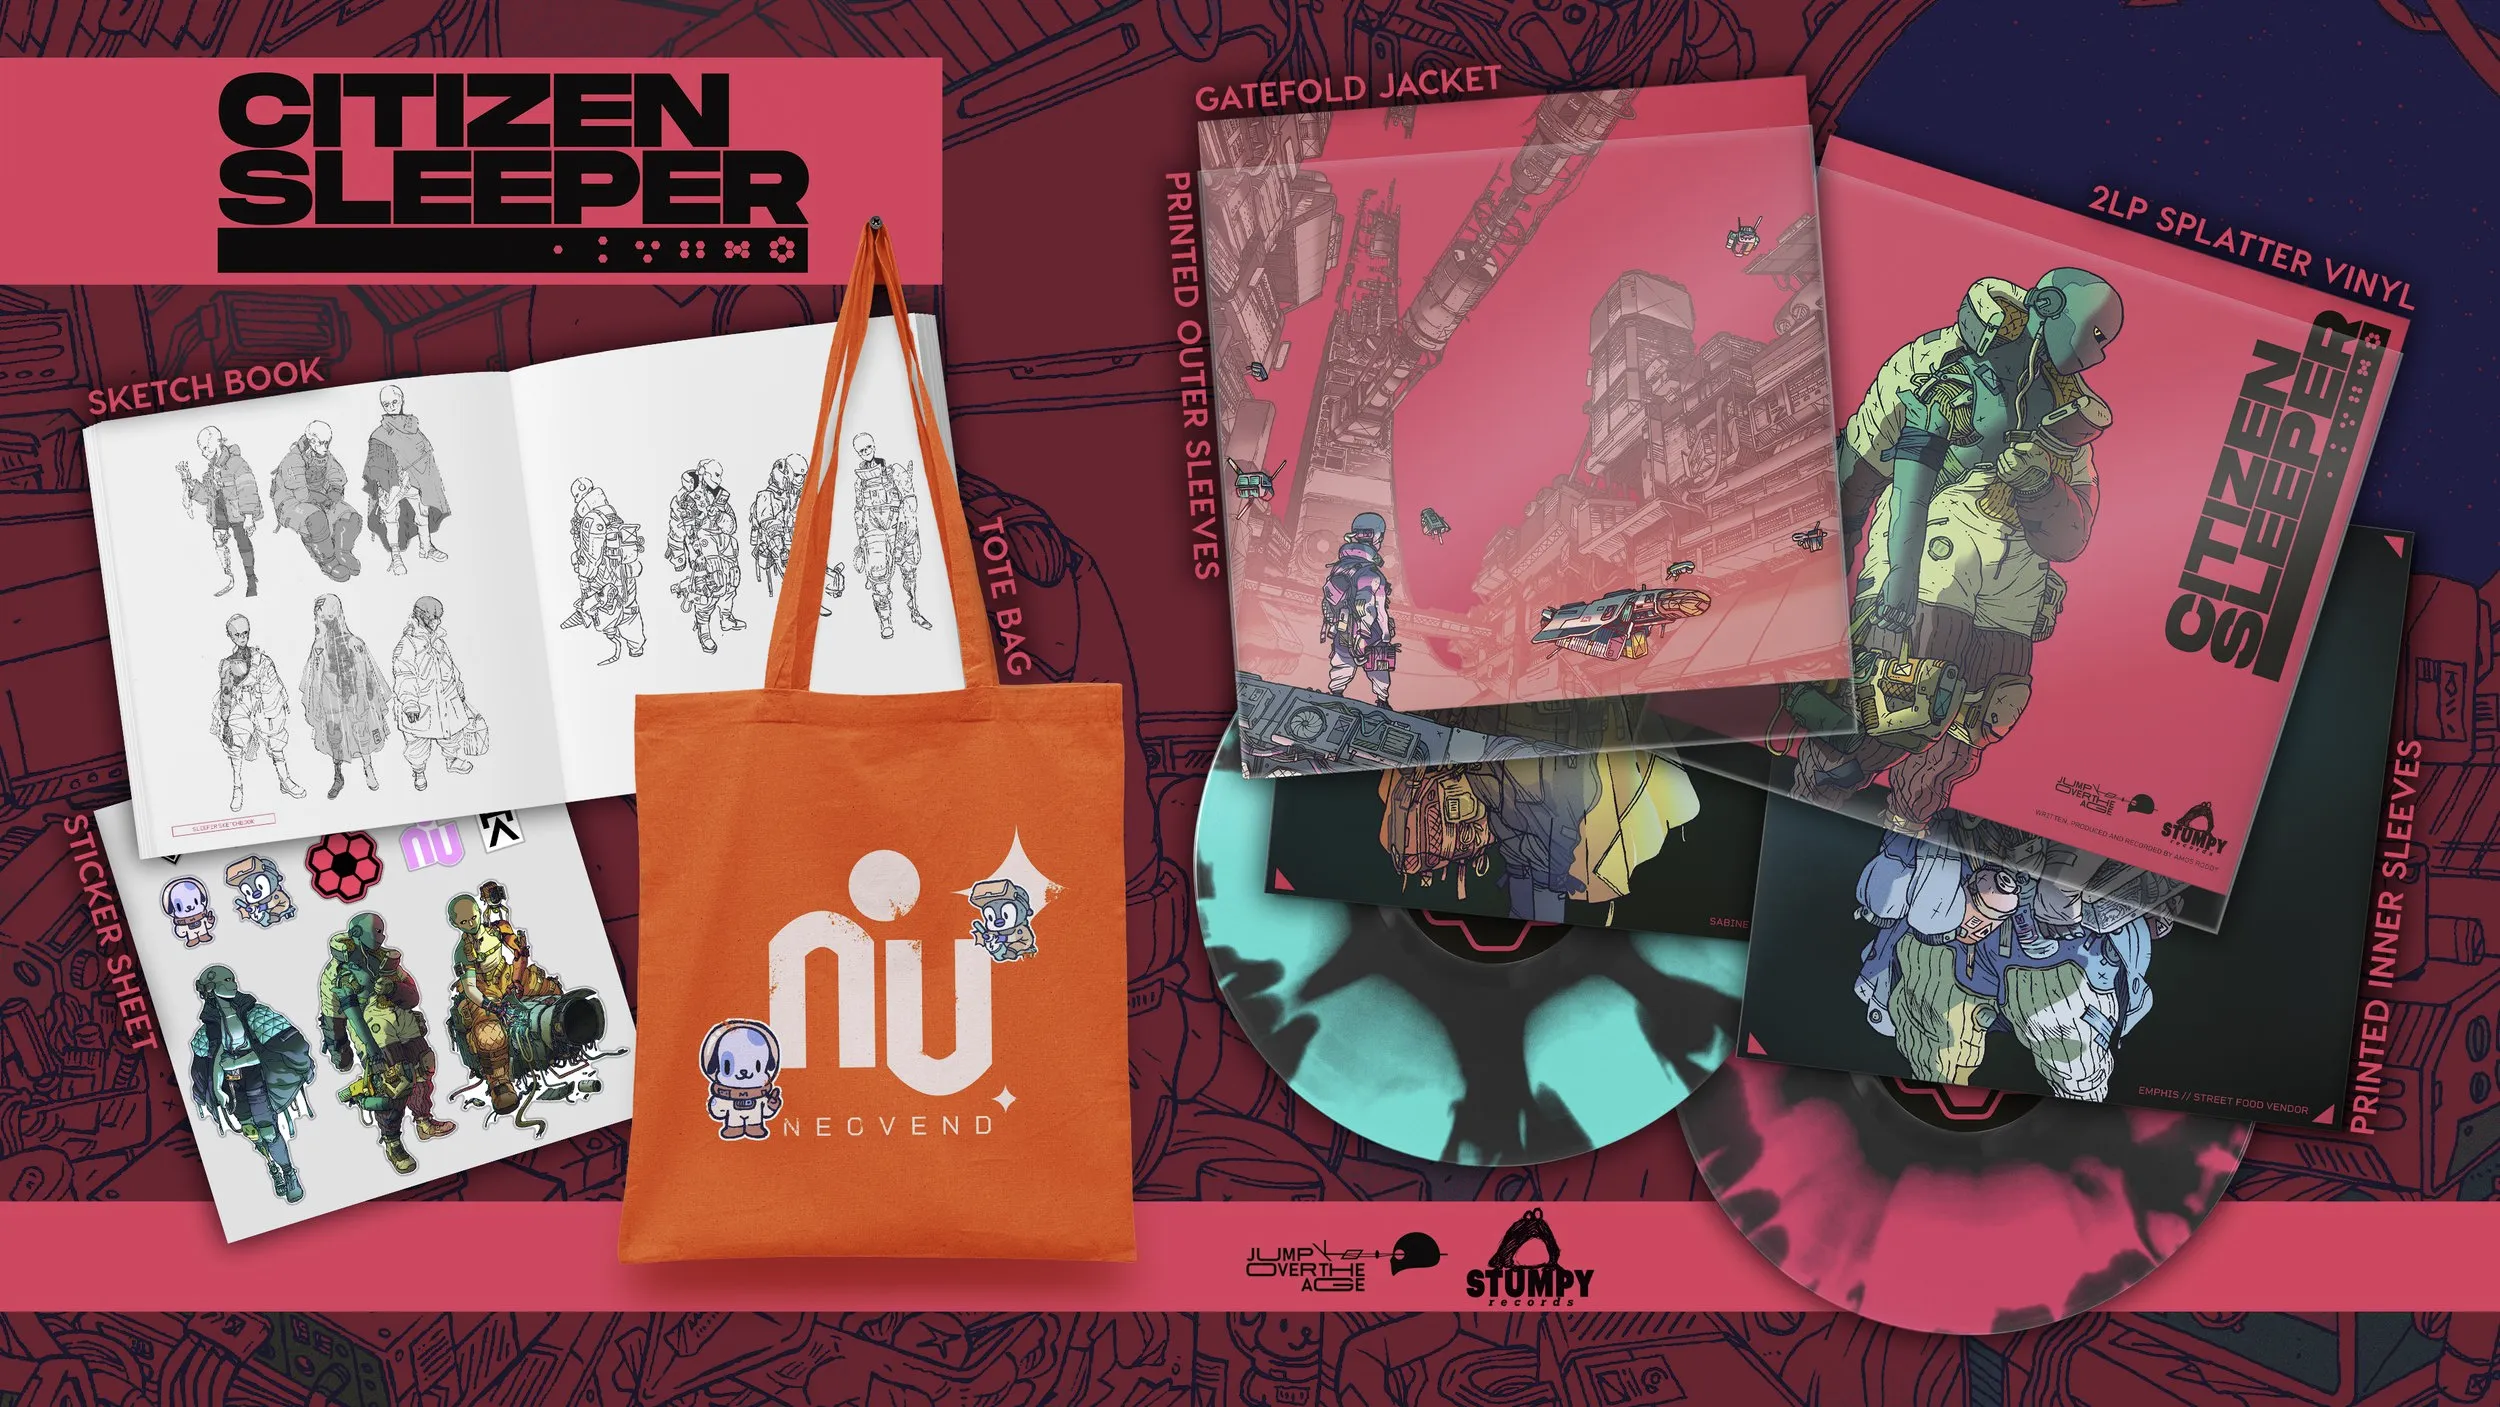 Citizen Sleeper sketch book, sticker sheet, canvas bag and inner, outer sleeves with vinyl variants